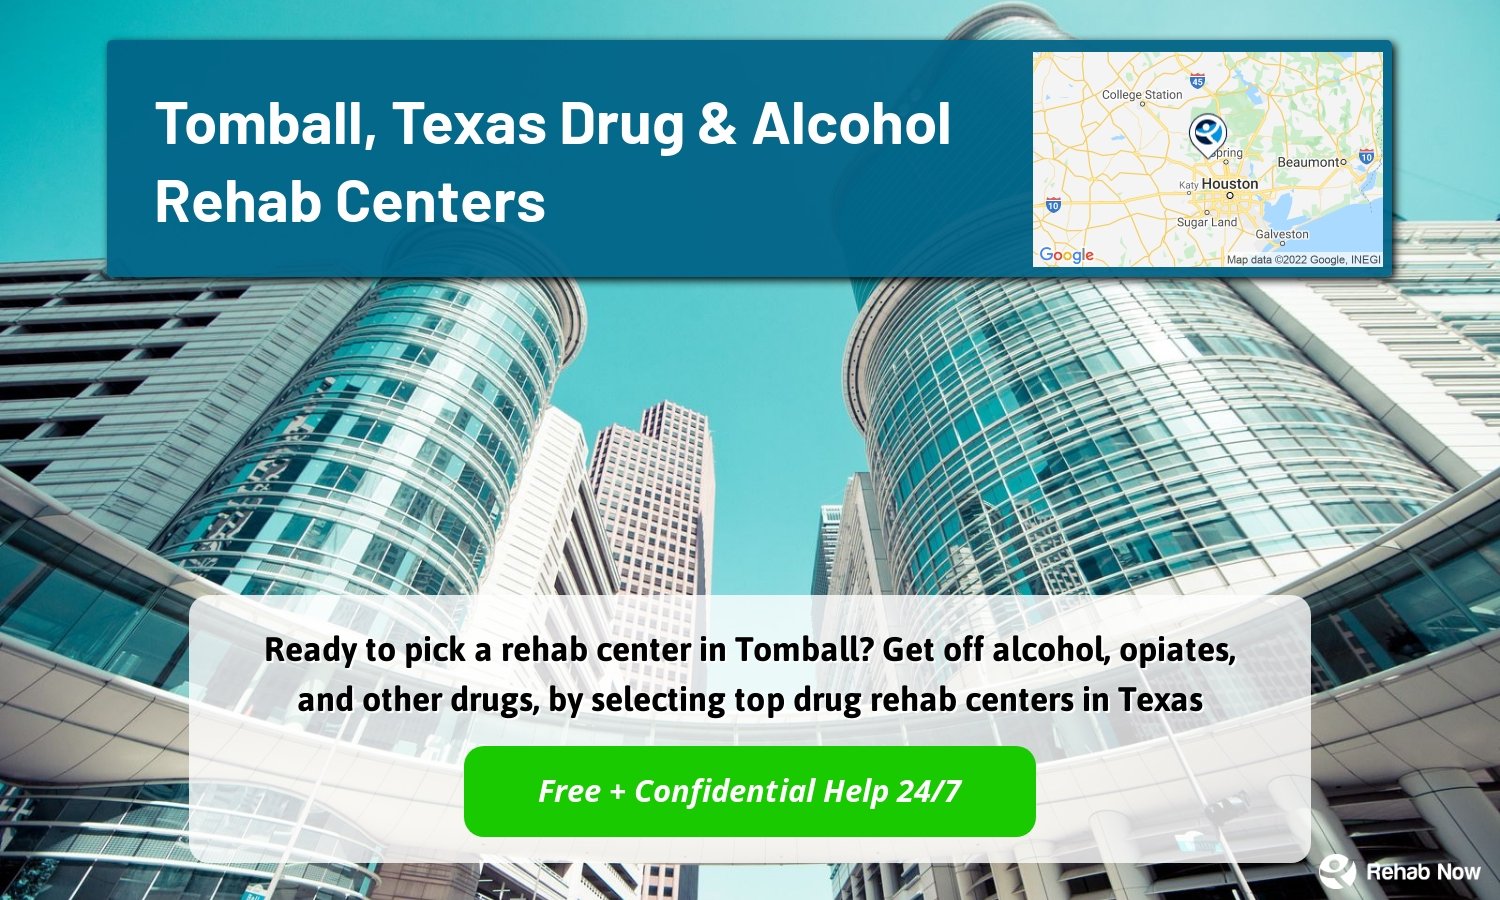 Ready to pick a rehab center in Tomball? Get off alcohol, opiates, and other drugs, by selecting top drug rehab centers in Texas